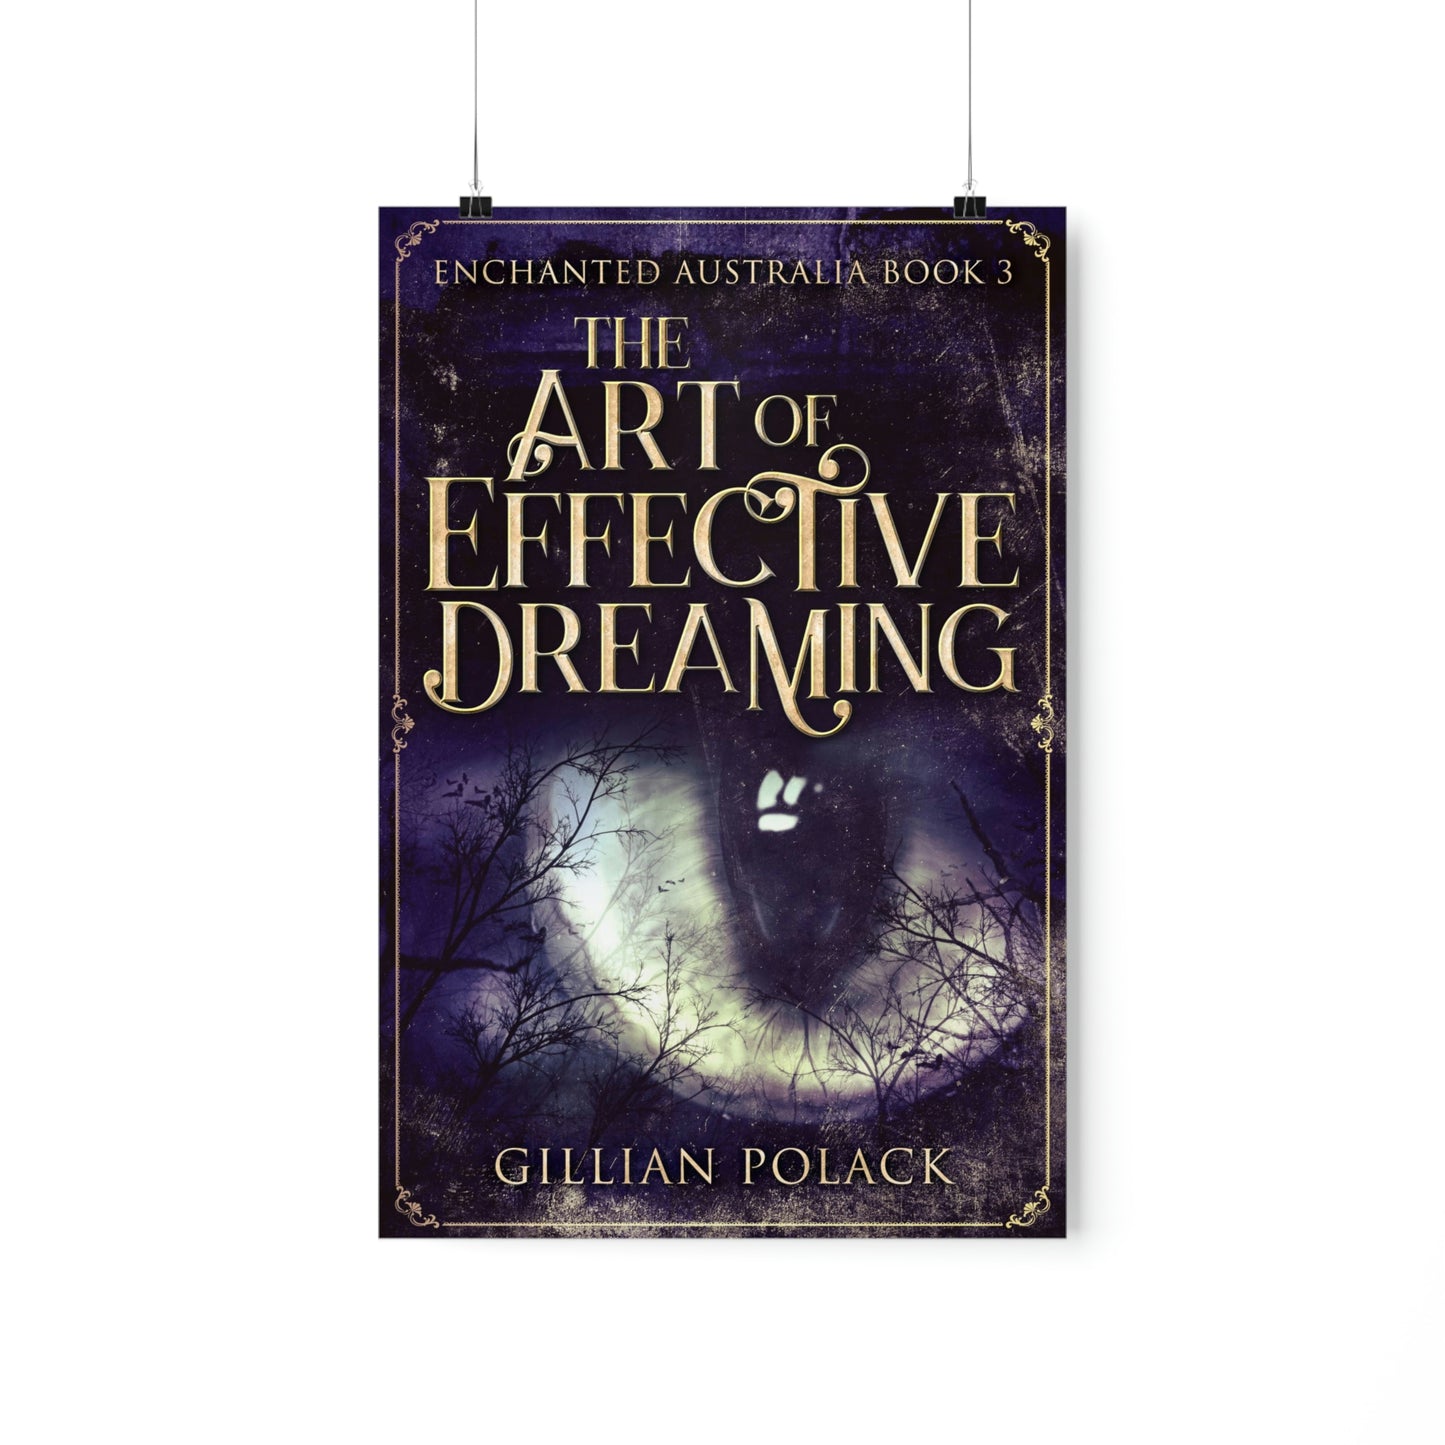 The Art of Effective Dreaming - Matte Poster